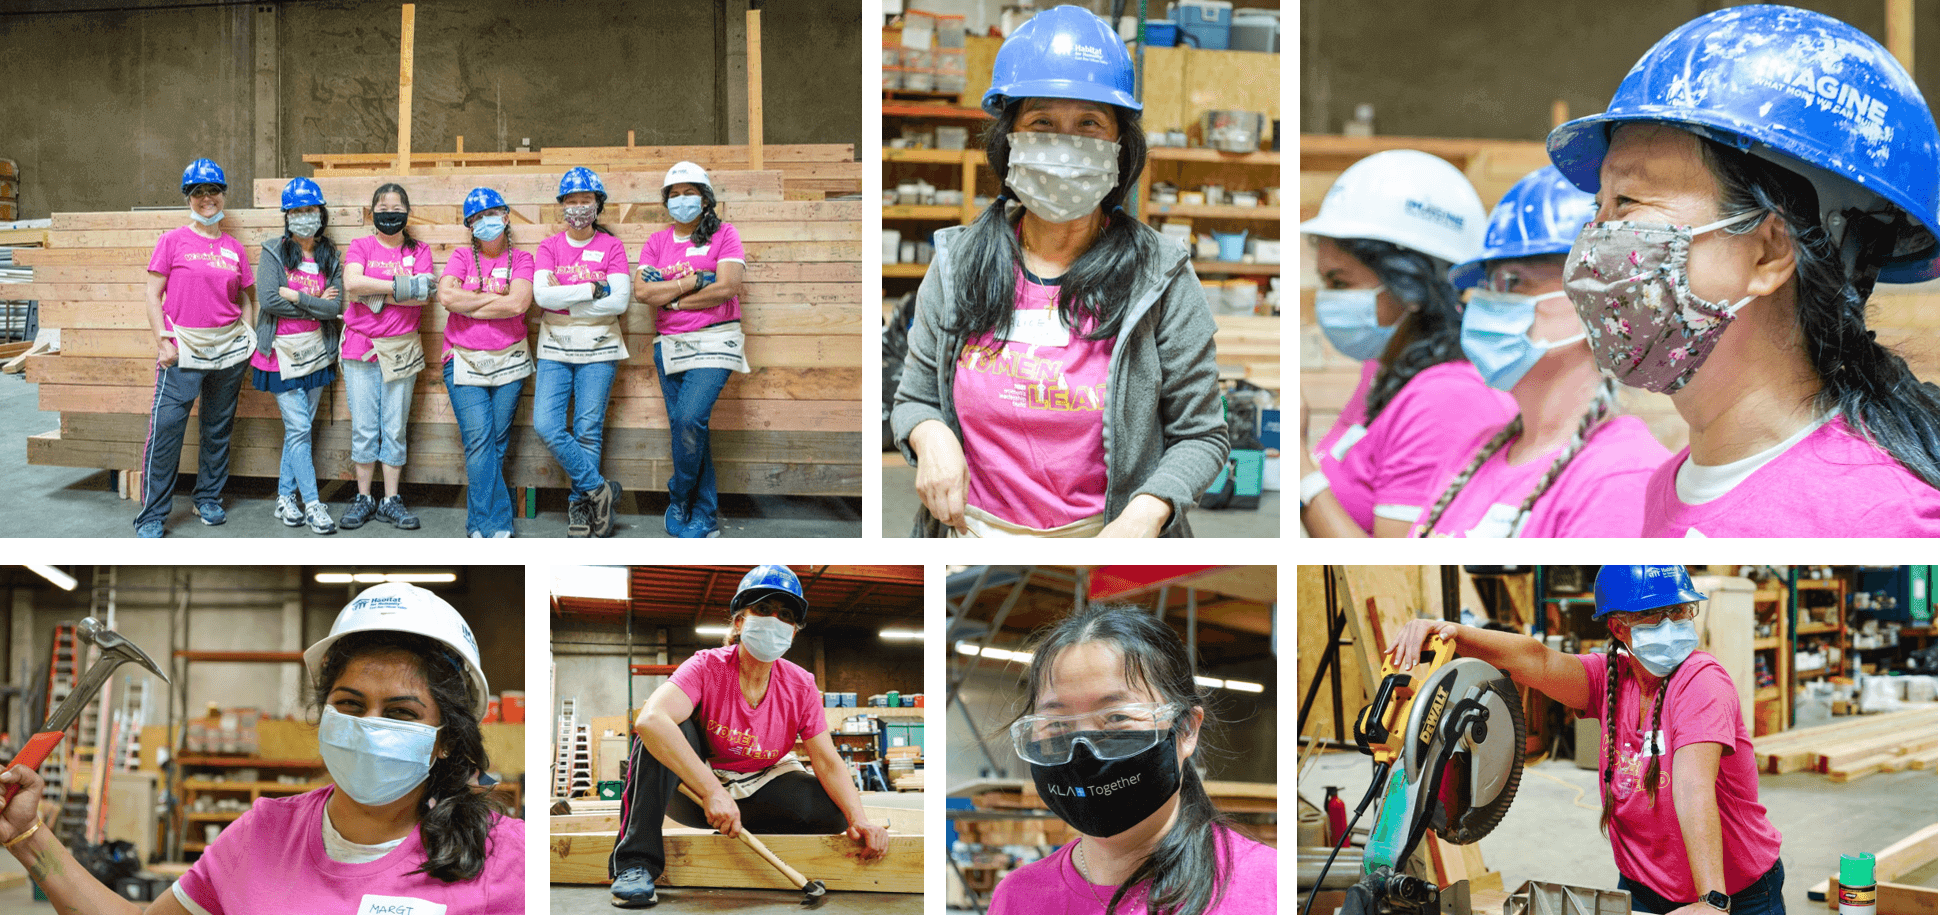 The Women in Stem Empowered (W.I.S.E.) Employee Resource group participating in the Women’s Build for Habitat for Humanity, 2021.